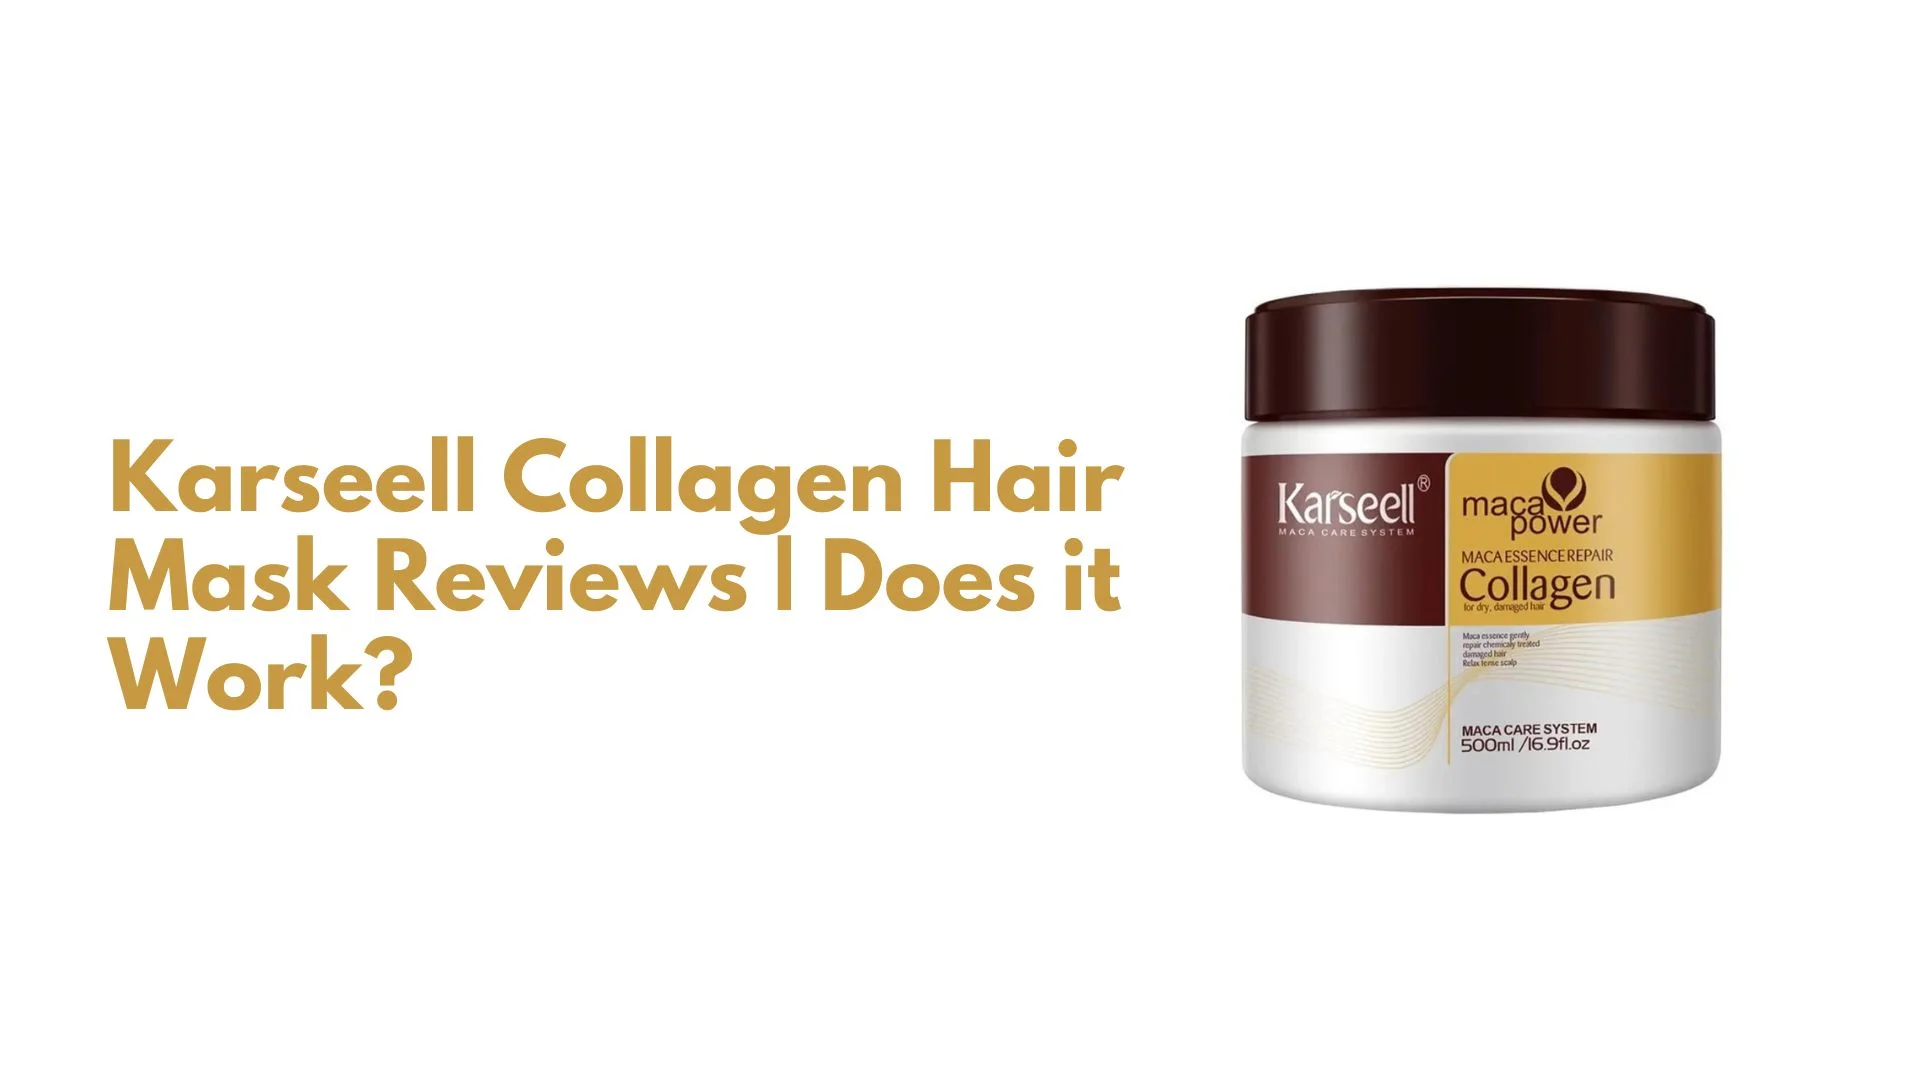 Karseell Collagen Hair Mask Reviews Does it Work